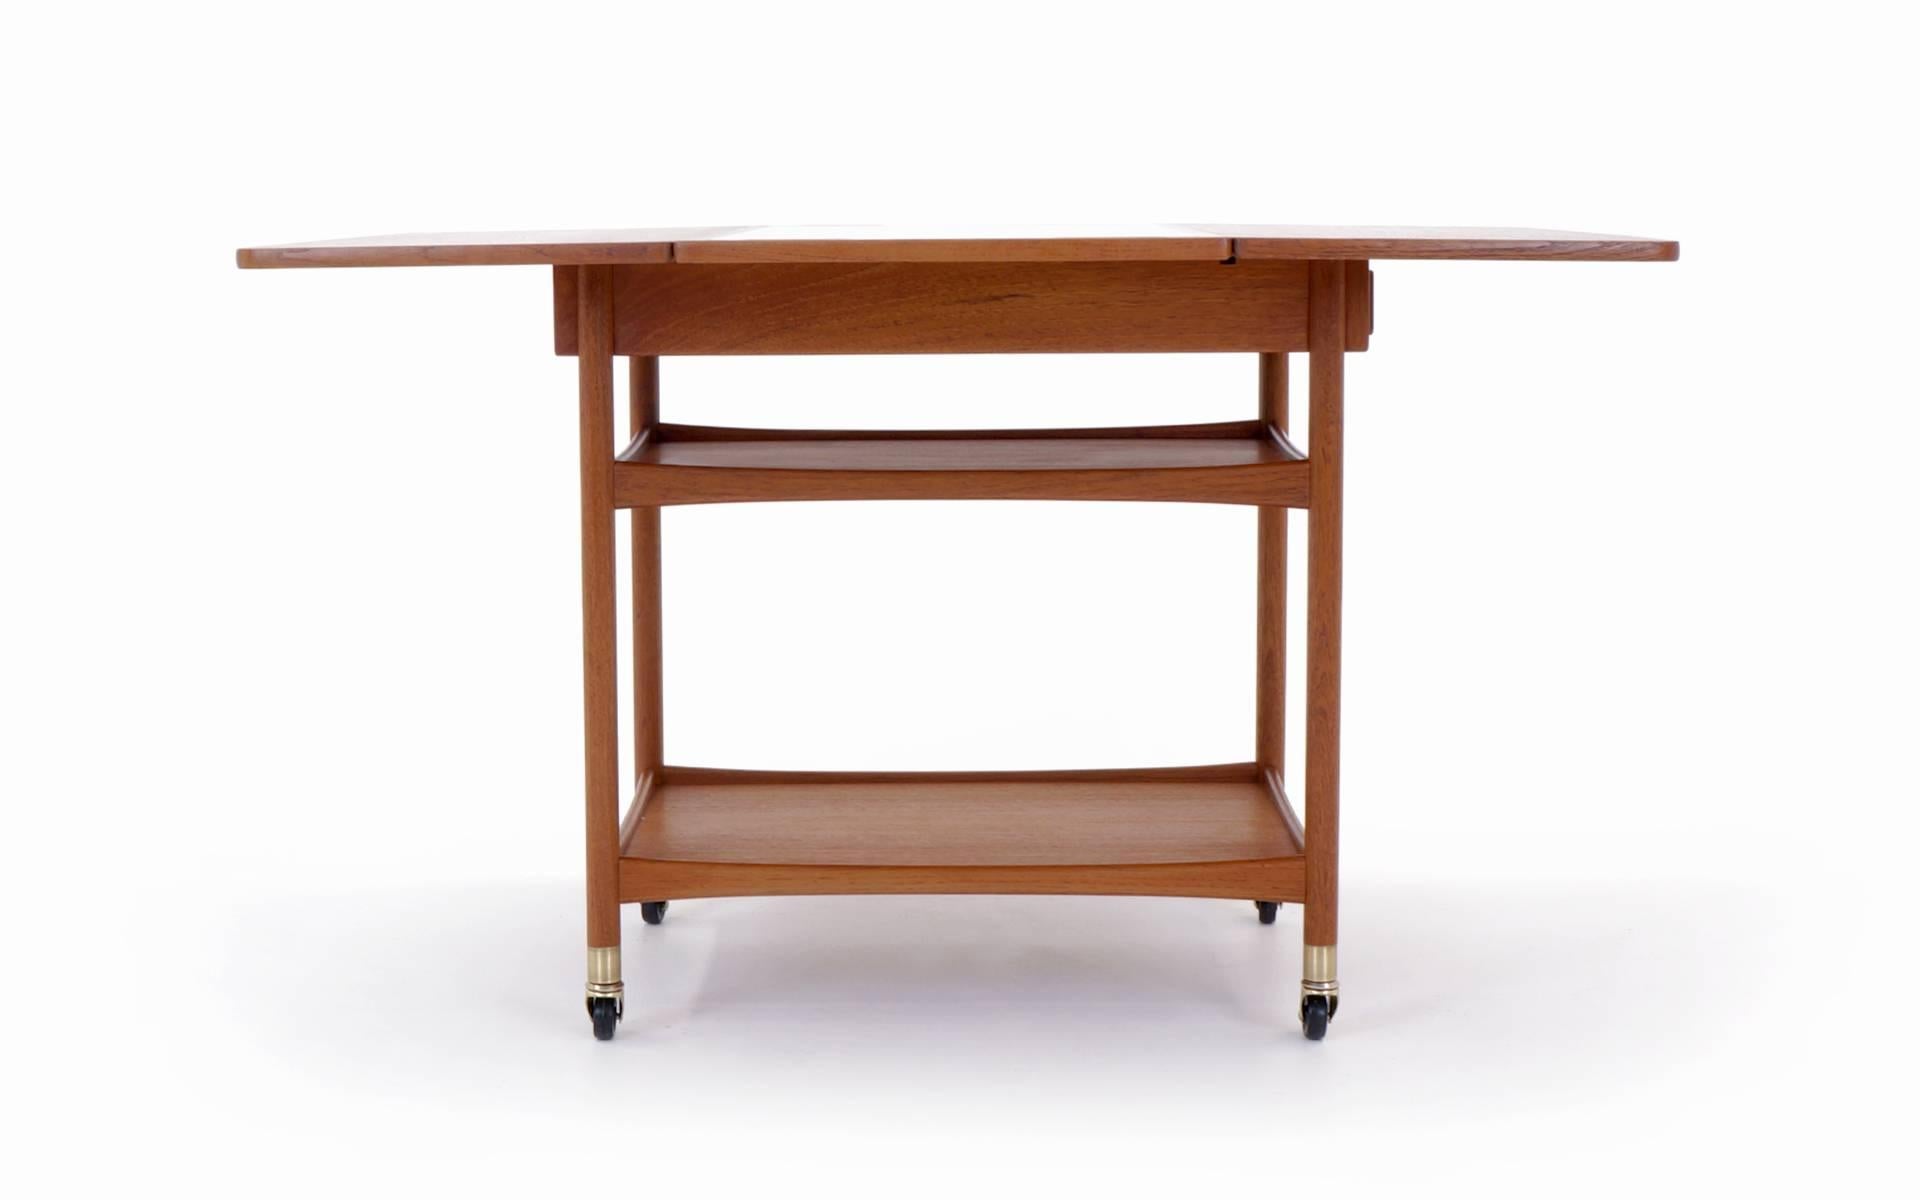 Versatile and unique Danish bar cart or serving cart with teak drop leaves and black laminate center surface. When you raise the leaves the top swivels to support the leaves. A very sophisticated design. Collapsed width is 17.75 in. extended width